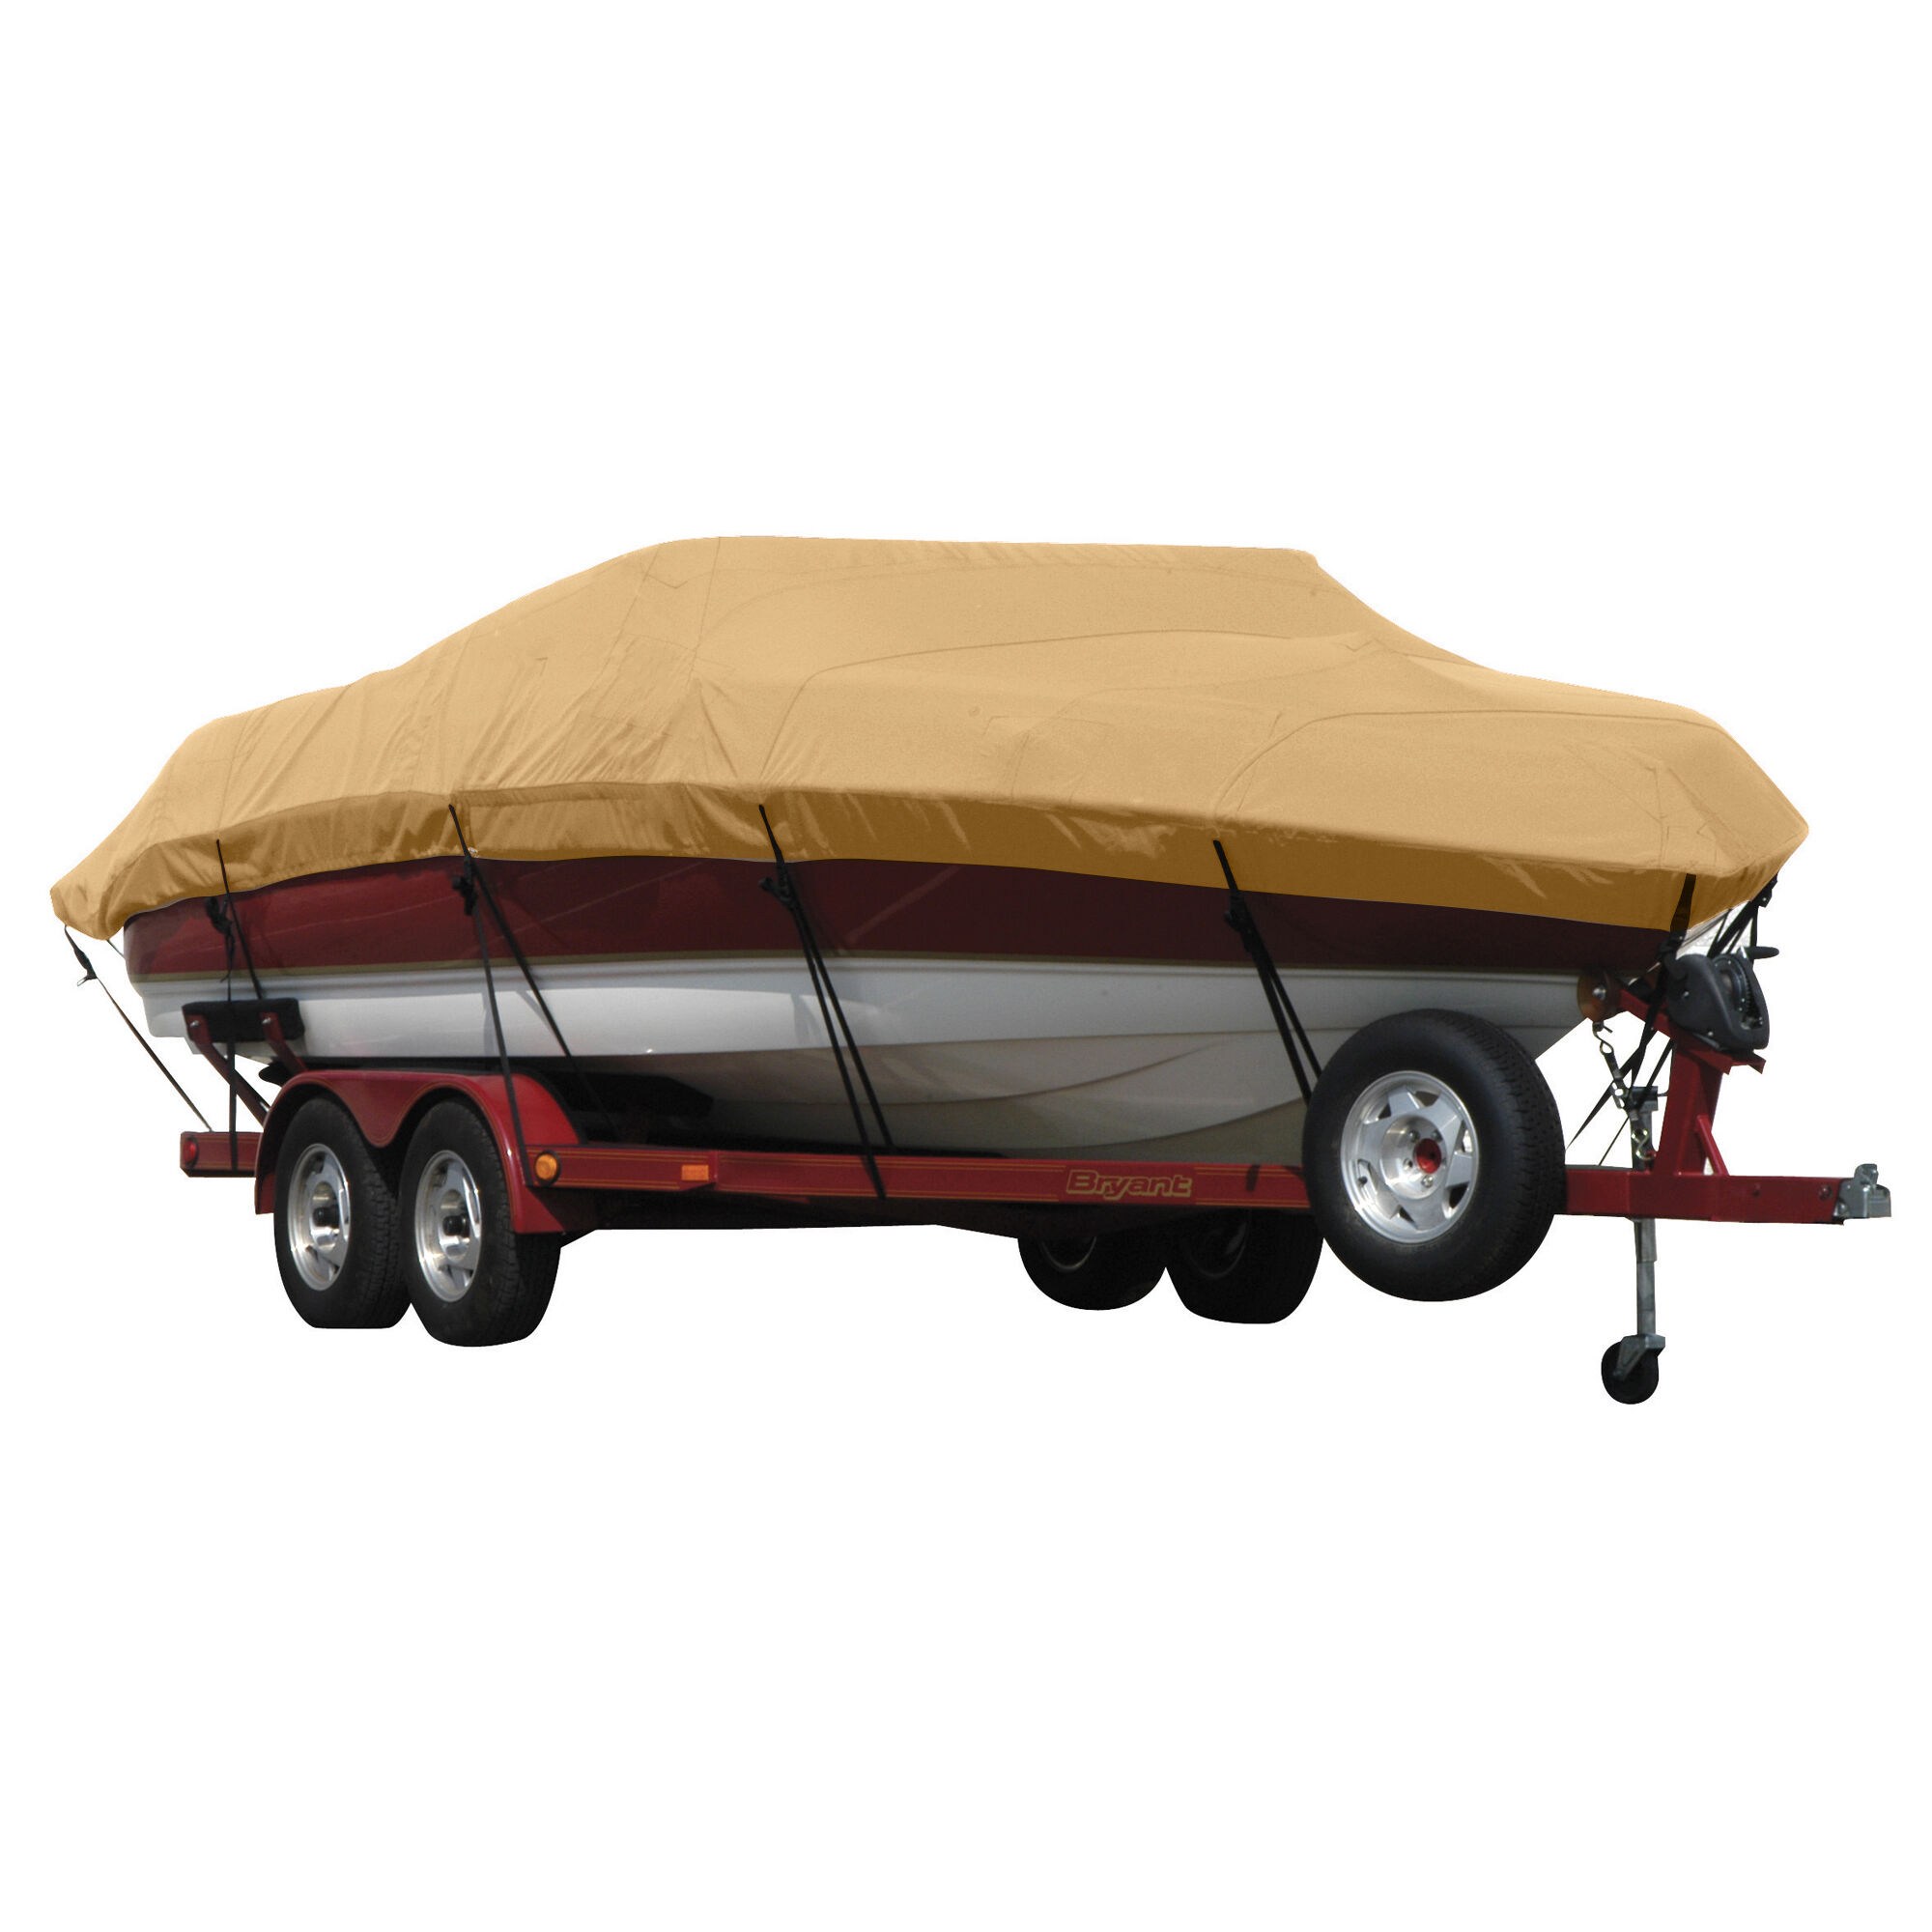 Covermate Exact Fit Sunbrella Boat Cover for Cobalt 253 253 Cuddy Cabin No Spot Light w/ Port Side Ladder I/O. Toast